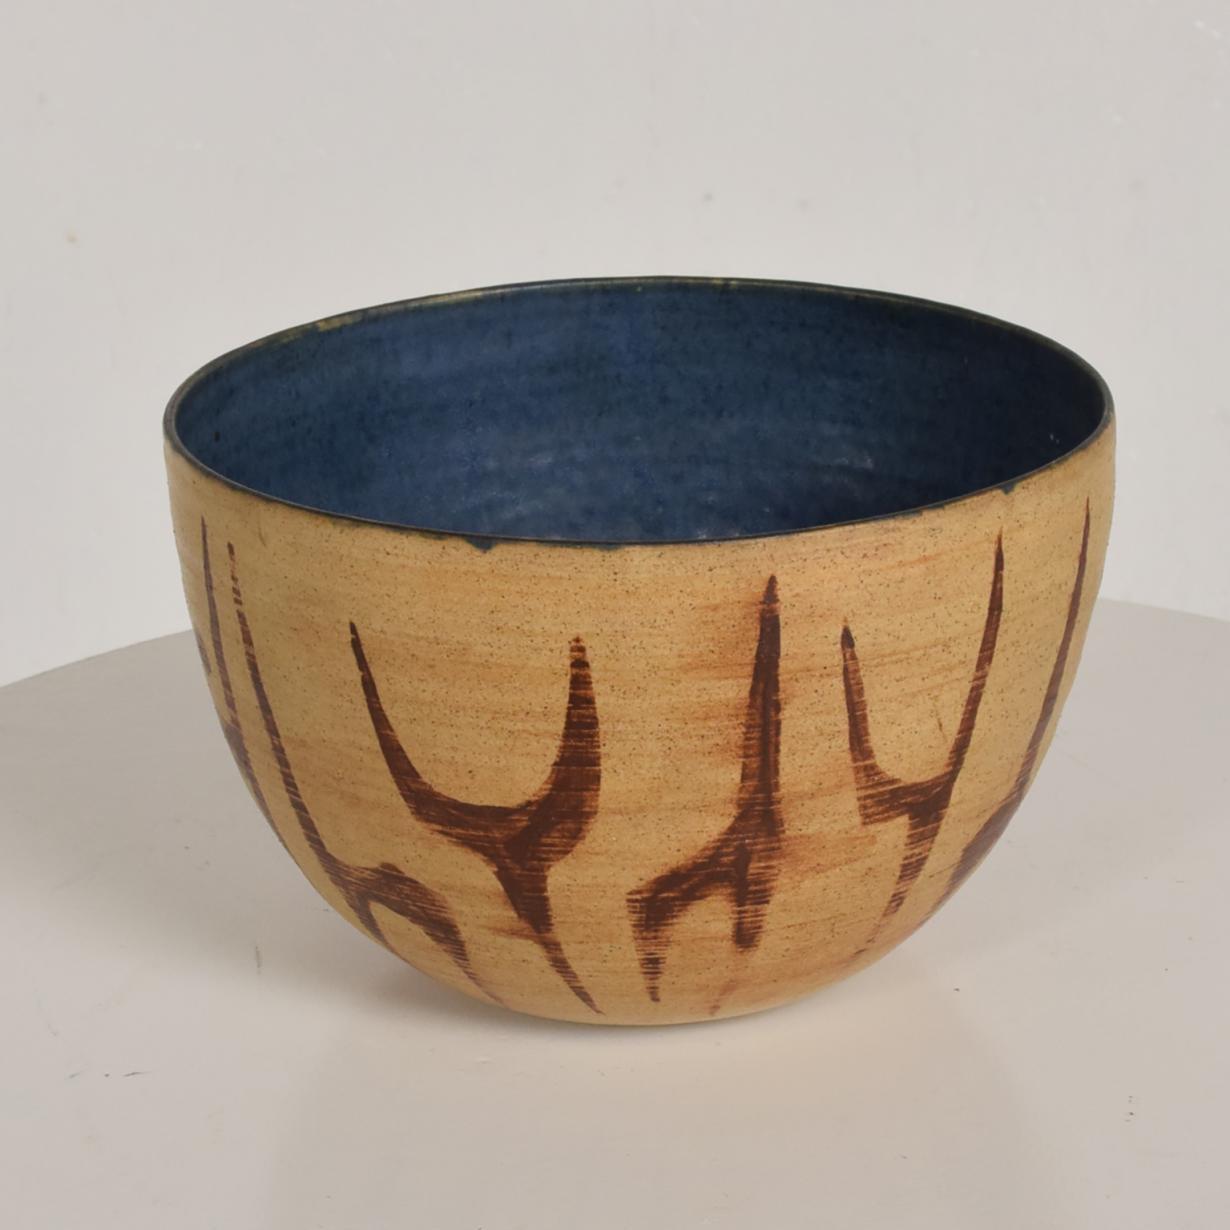 For your consideration, Mid-Century Modern bowl with beautiful decoration, earth tones with blue inside Natzler era.


Unsigned. 


Dimensions: 7 1/2